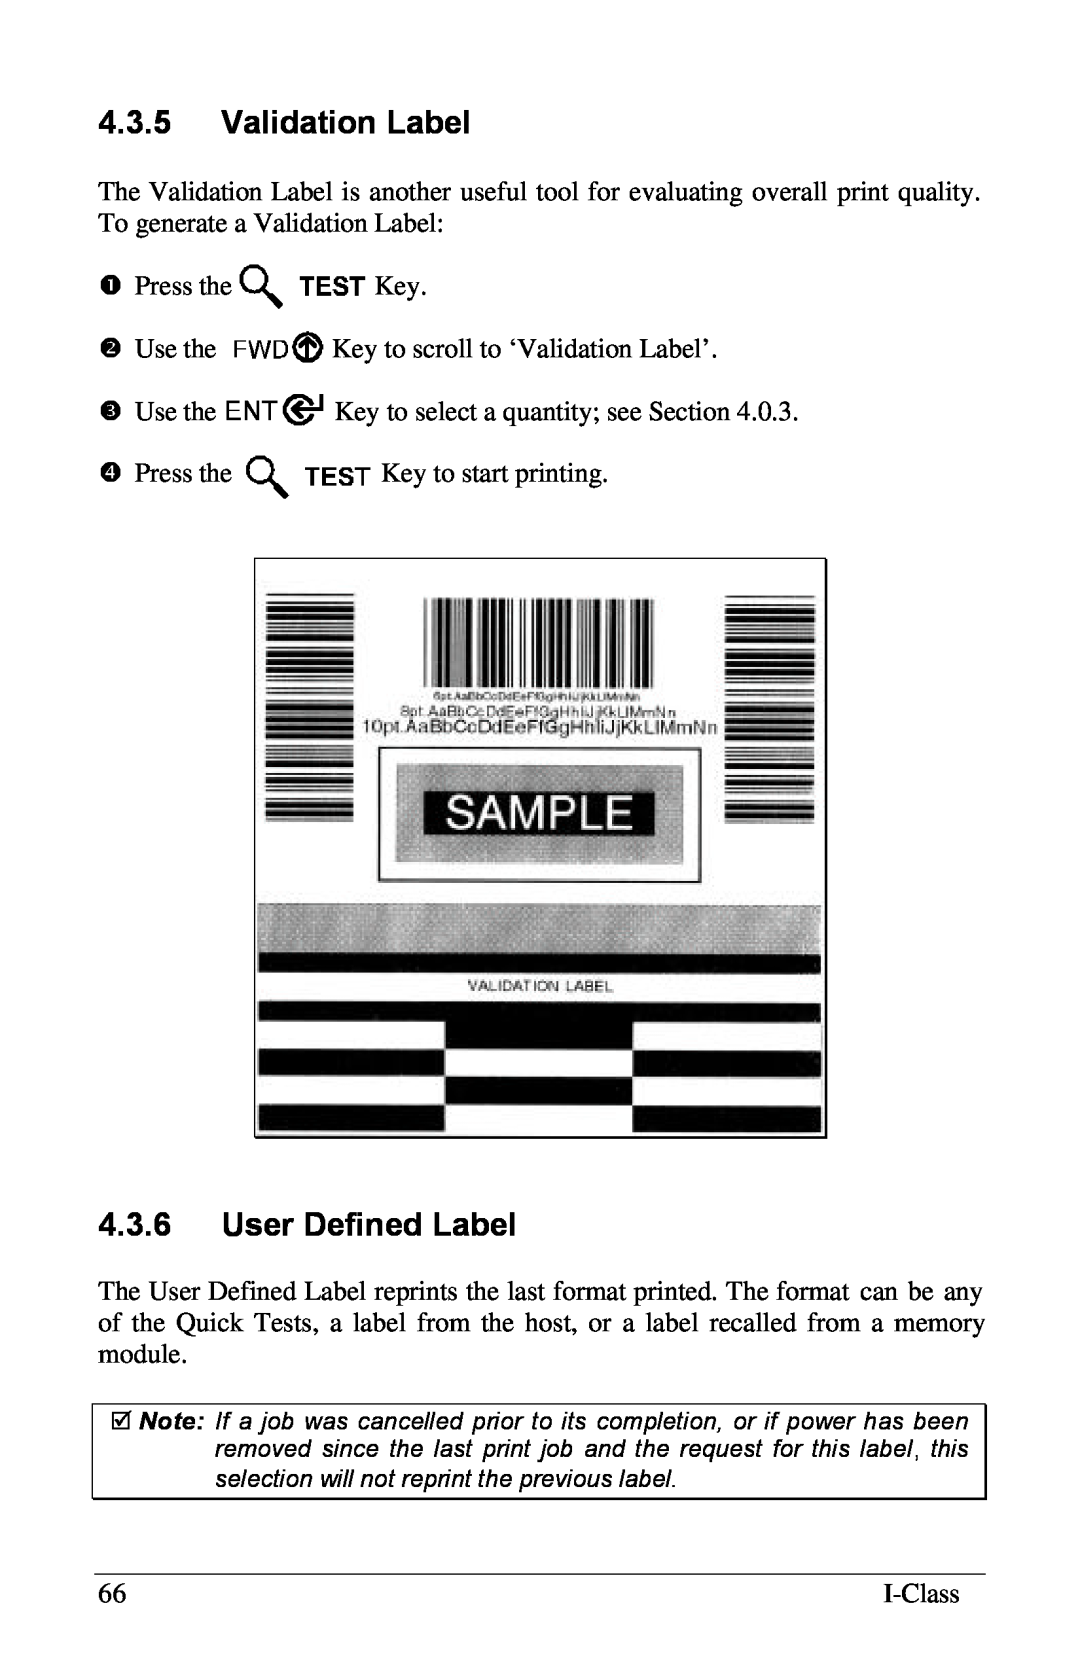 Xerox I Class manual 4.3.5Validation Label, 4.3.6User Defined Label 